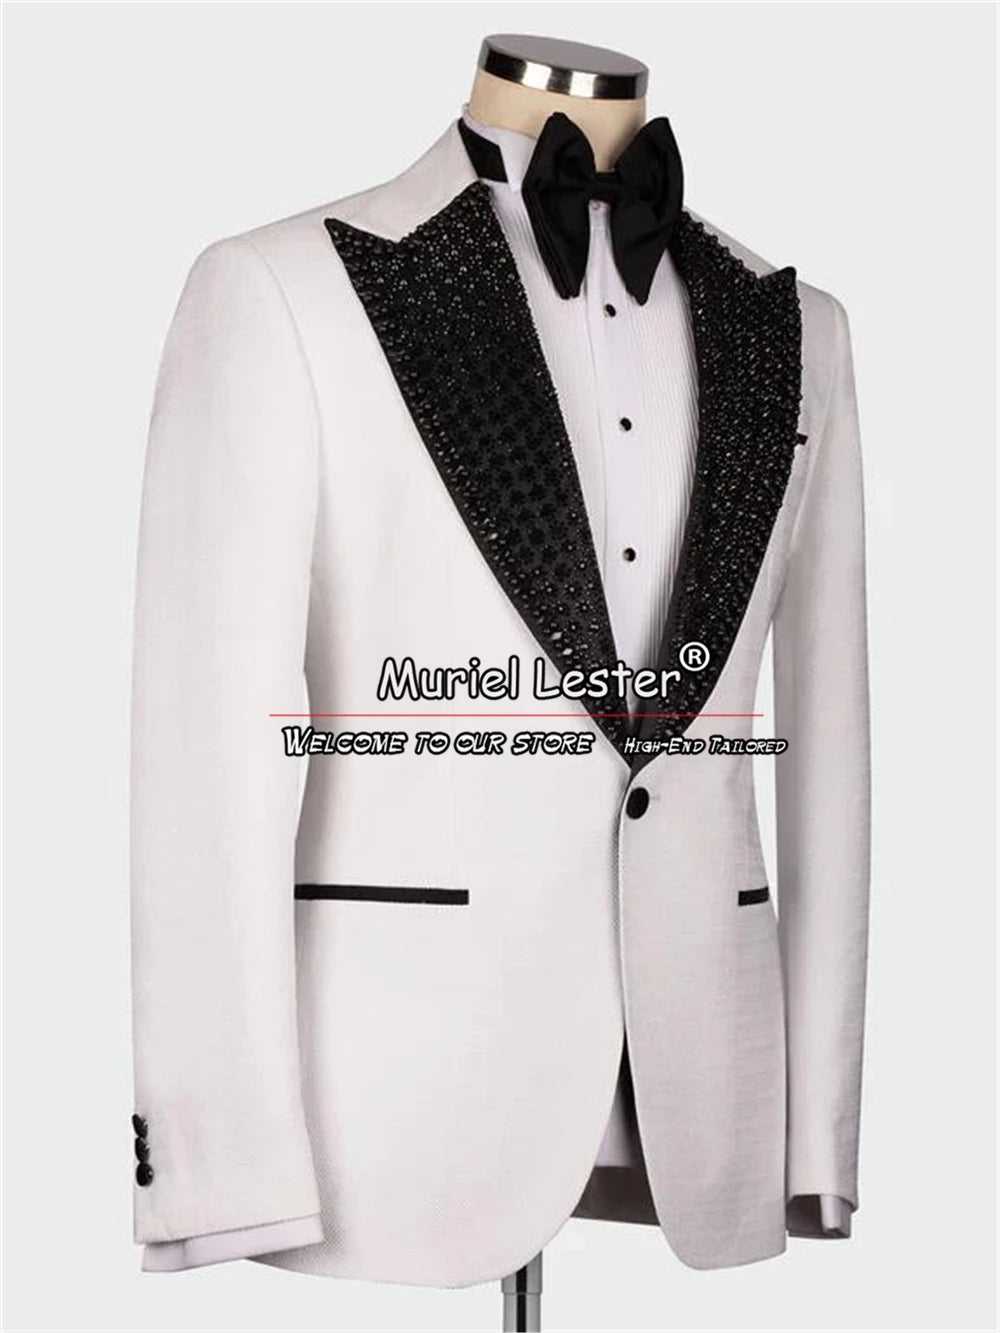 Luxury Groom Wedding Suits Luxury Formal Prom Party Tuxedo Tailor-Made Gem Stone Peaked Lapel Jacket Vest Pants 3 Pieces Dress